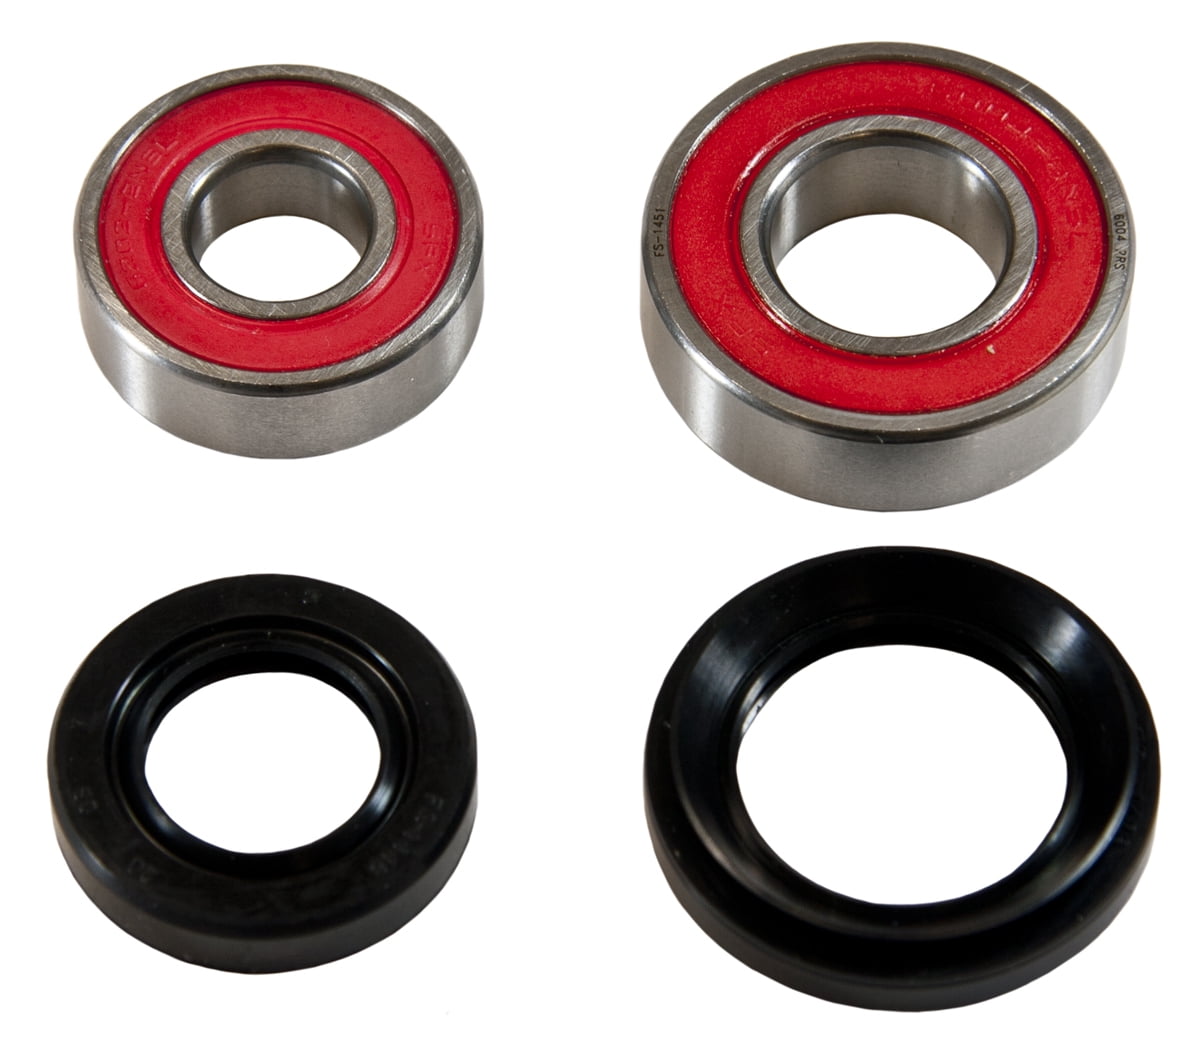 Factory Spec Bearing for Yamaha Replaces OEM # 93306-90403-00 FS-1454 